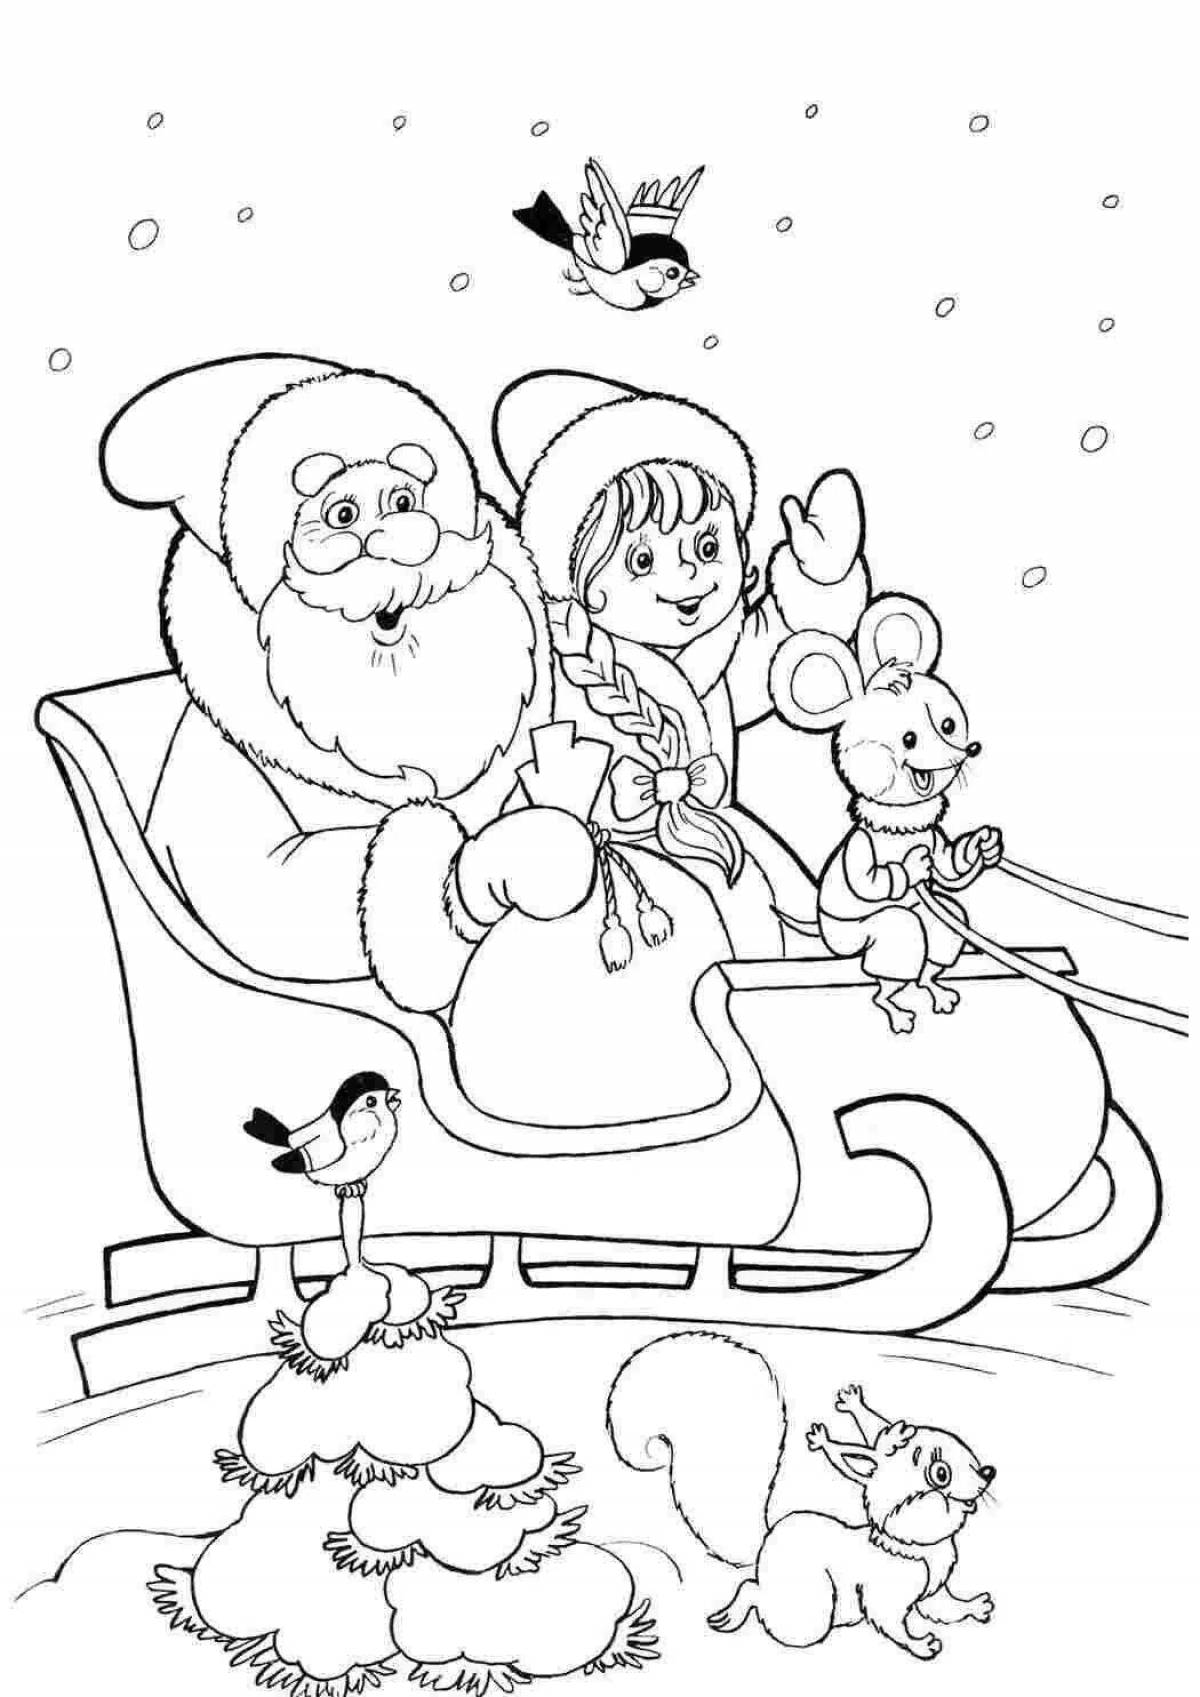 Bright Christmas coloring Santa Claus and Snow Maiden